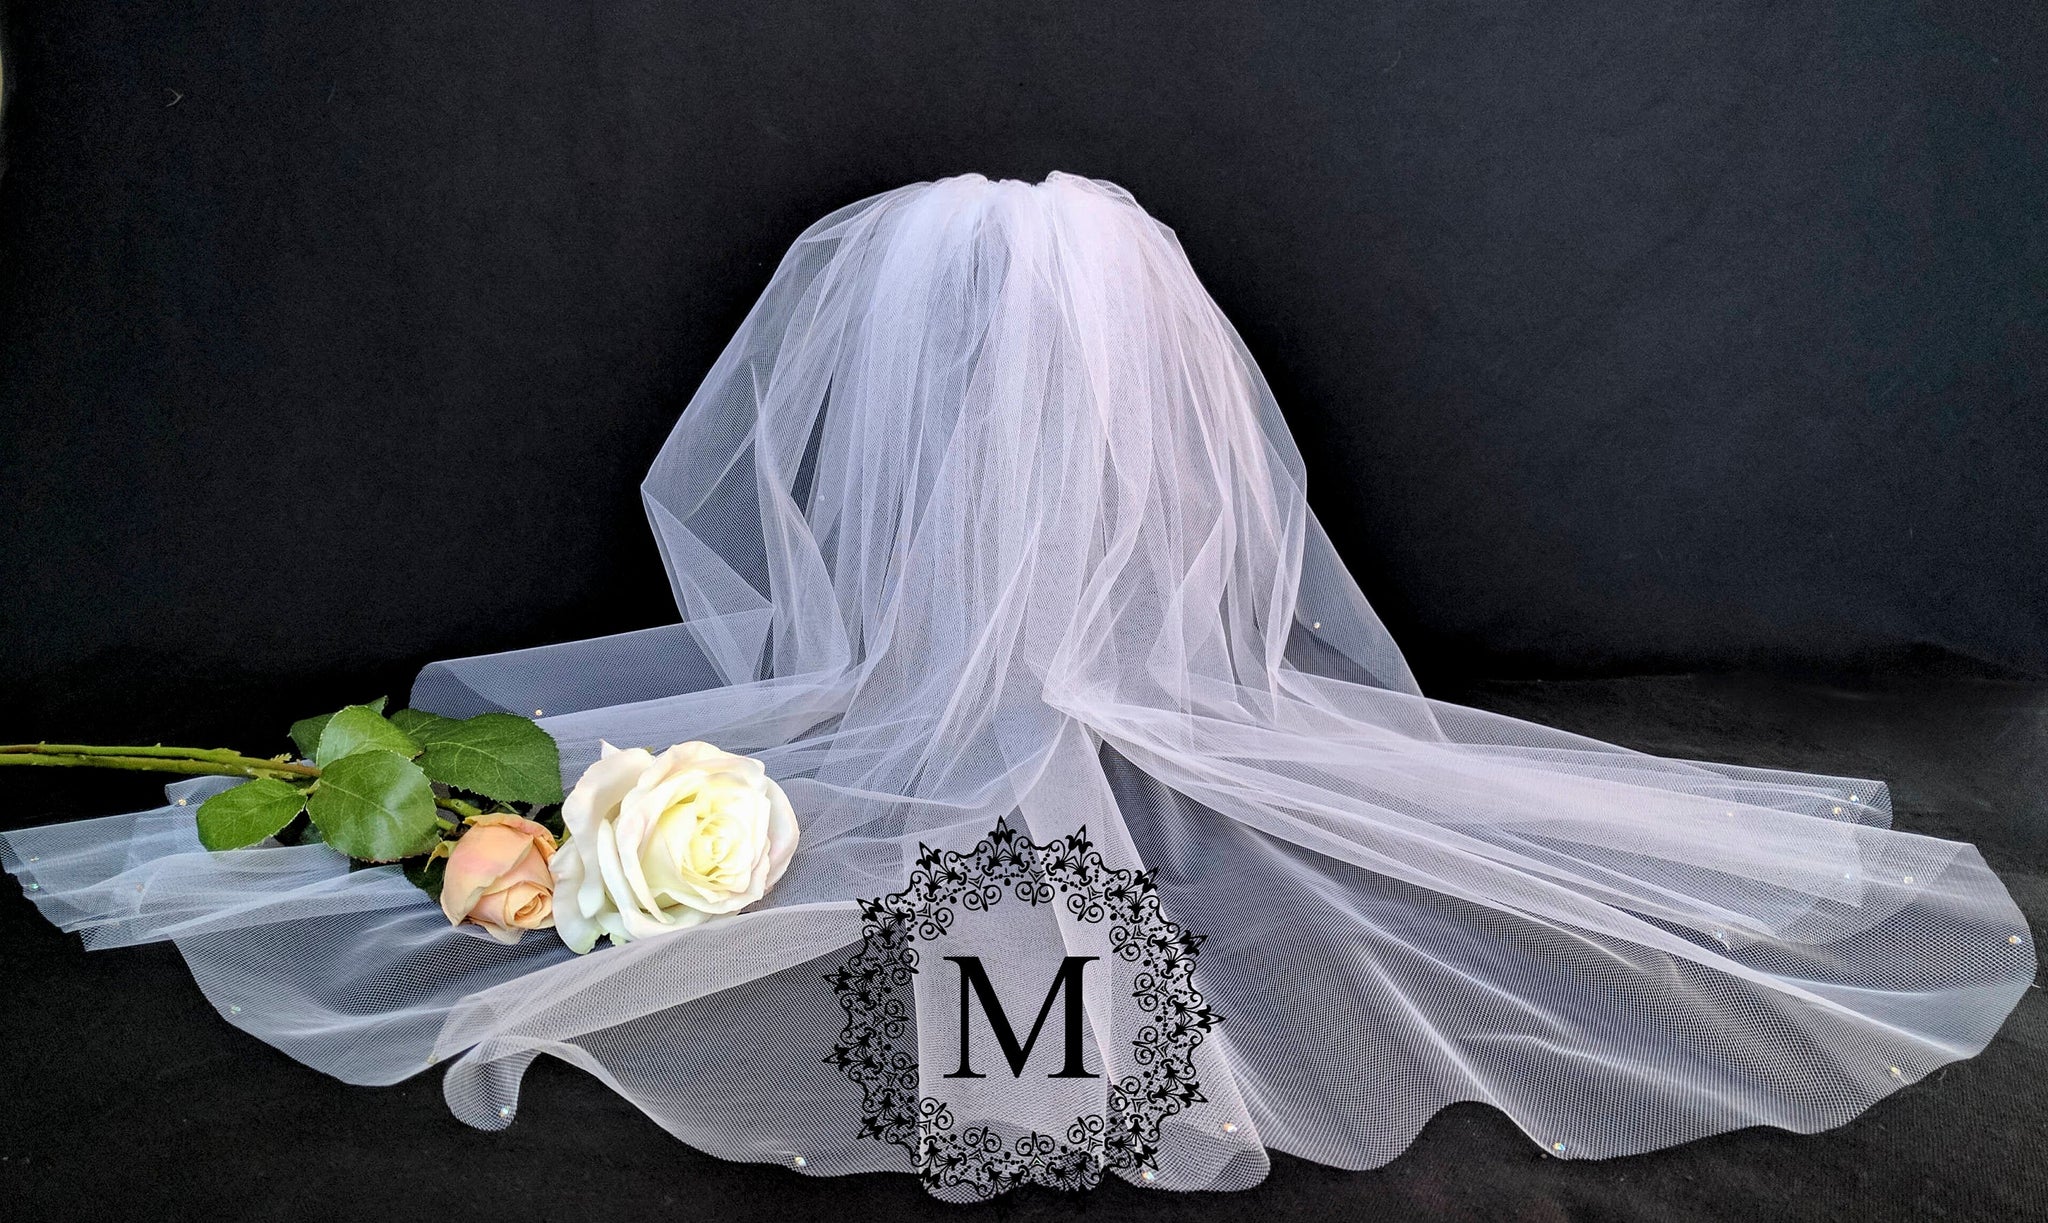 75-500cm White/Ivory Bridal Veil With Pearls Wedding Cathedral Veil Crystal  Comb